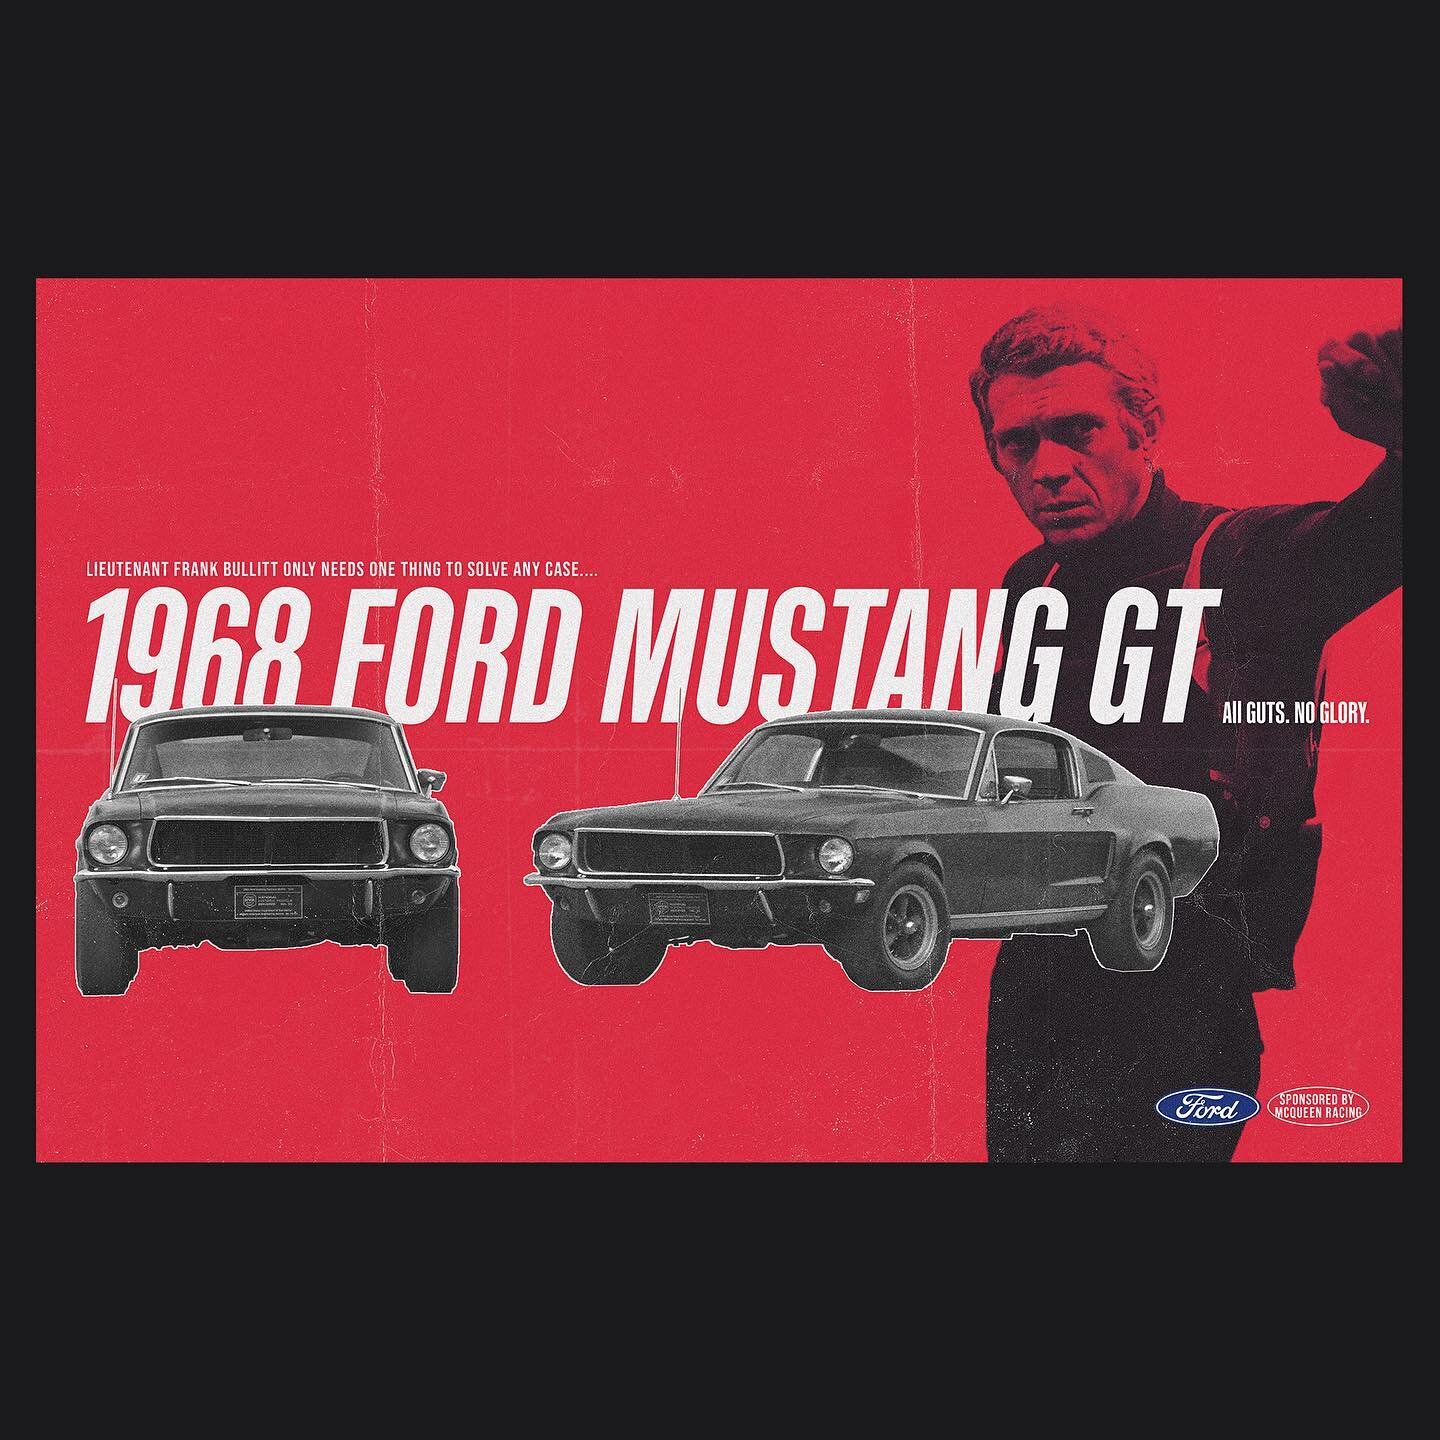 Car Ad for 1968 Ford Mustang GT. Always been a Mustang guy but I can&rsquo;t help advertising the car for its exploits in the 1968 film &ldquo;Bullitt&rdquo; under the hands of the king of cool, himself, Steve McQueen.

The car was just recently sold